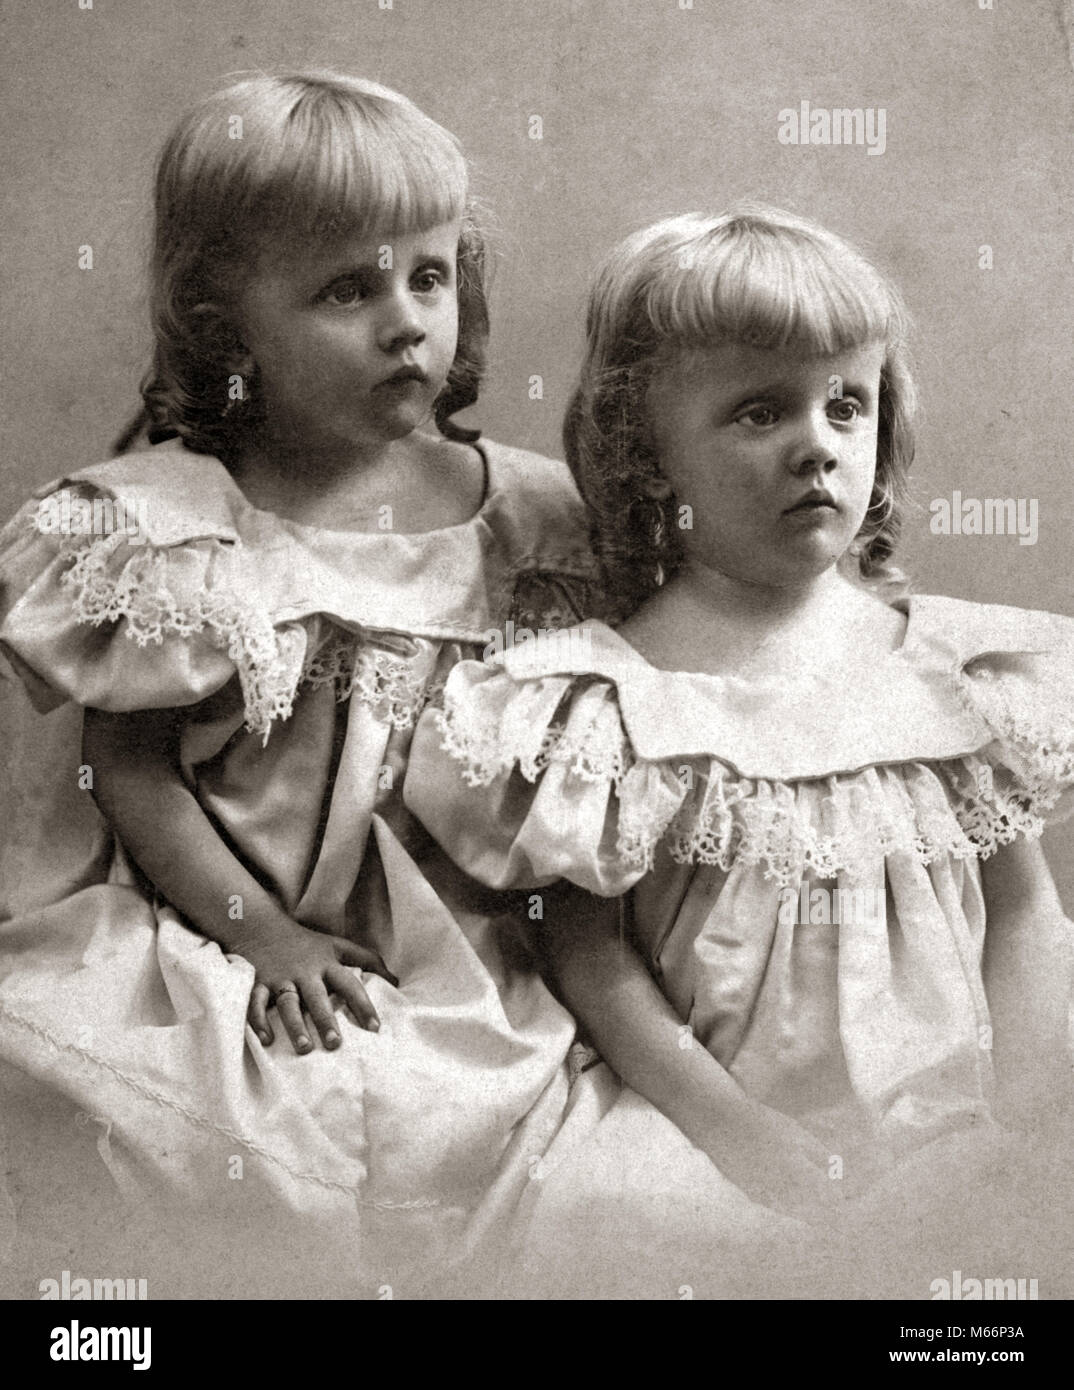 1890s PORTRAIT TURN OF THE 20TH CENTURY TWIN GIRLS SISTERS WEARING IDENTICAL DRESSES AND SHOWING MOROSE SAD FACIAL EXPRESSIONS - o4472 HAR001 HARS NOSTALGIA SADNESS TOGETHERNESS 1-2 YEARS 3-4 YEARS MATCHING SAME TURN OF THE 20TH CENTURY 1890s SIBLING CONNECTION ANONYMOUS LOOK-ALIKE DUPLICATE EMOTION EMOTIONAL EMOTIONS JUVENILES LOOK ALIKE B&W BLACK AND WHITE CAUCASIAN ETHNICITY CLONE MOROSE OLD FASHIONED Stock Photo